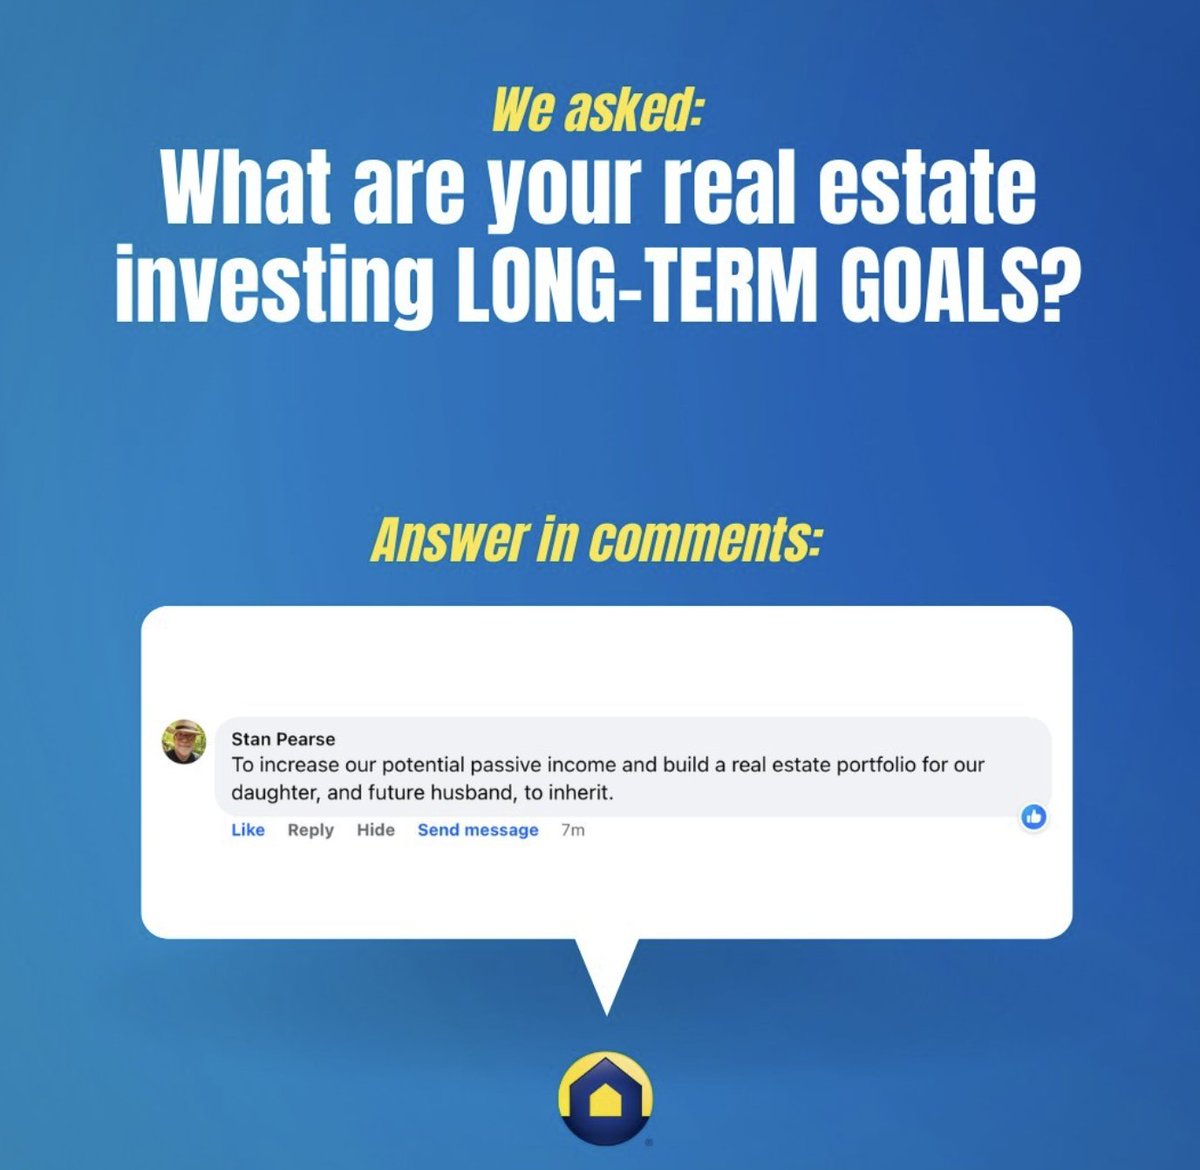 luinc: Real Estate Investing Goals.

#RealEstateInvesting #LifestylesUnlimited #RealestateInvesting #FinancialFreedom #RetireEarly #InvestingInrealestate #WealthBuilding #InvestingStrategy